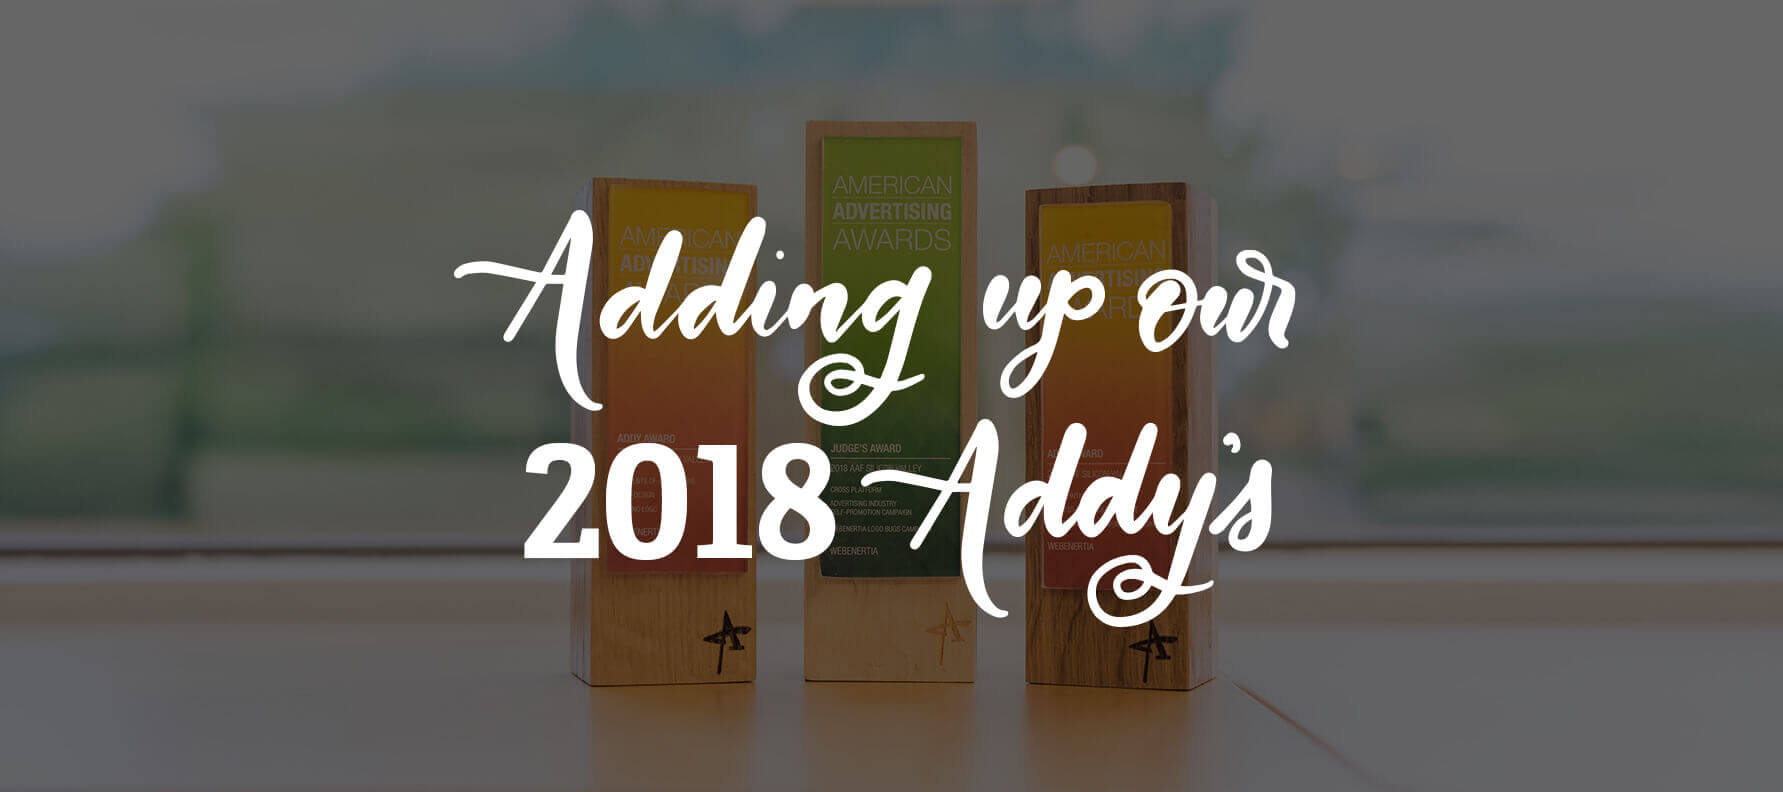 Adding Up Our 2018 Addys